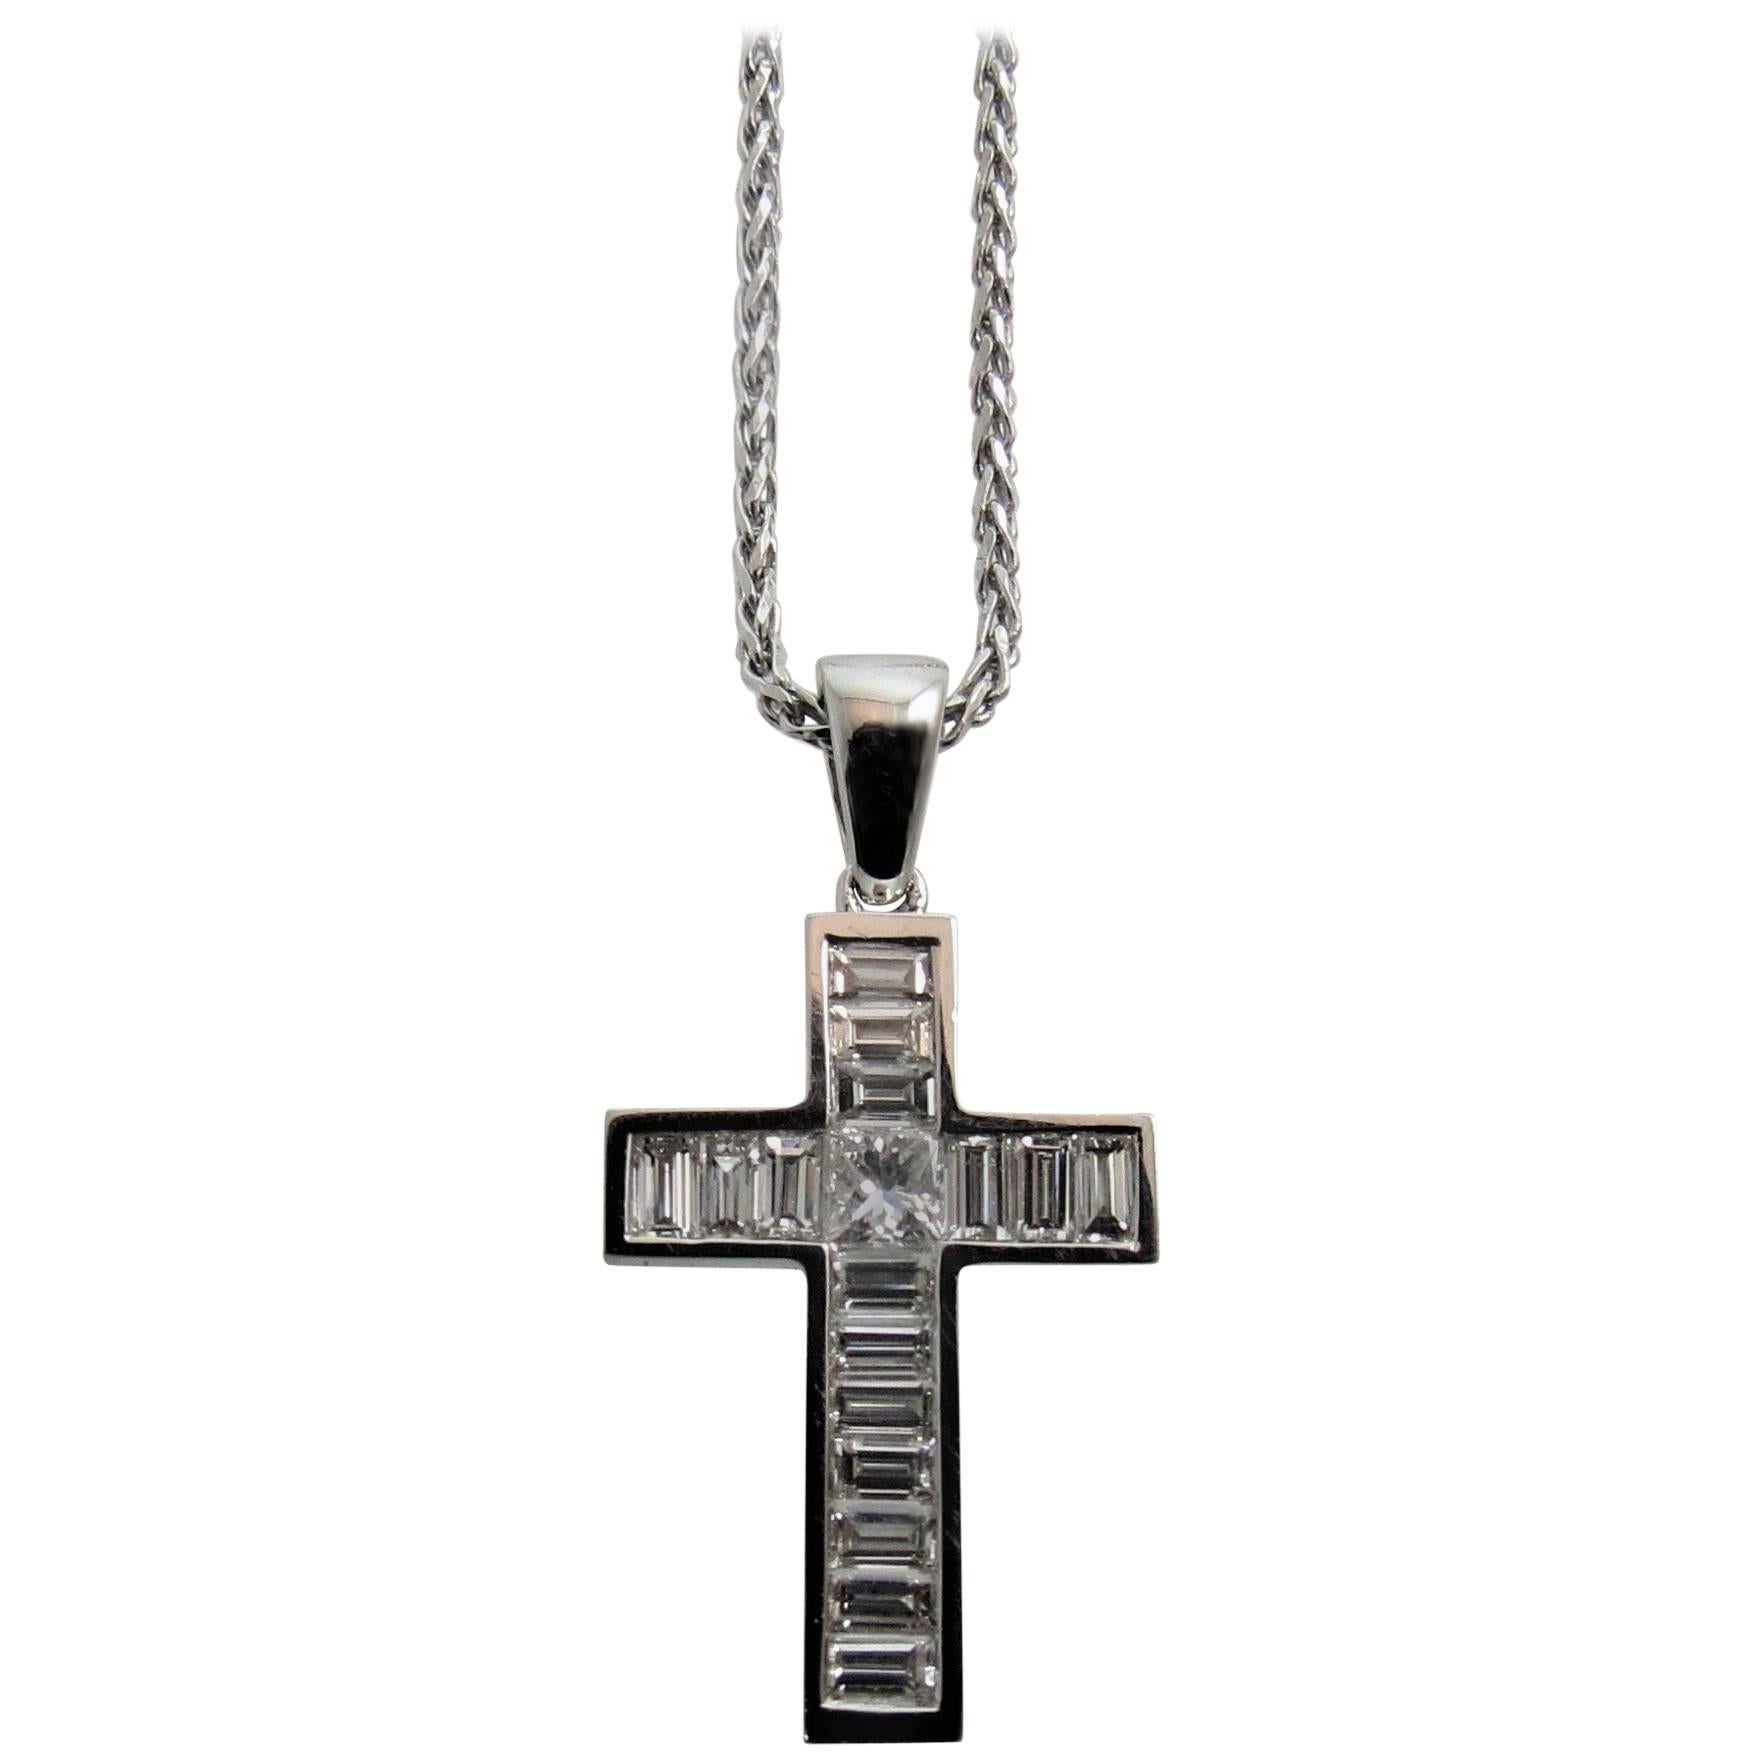 18 Karat White Gold Cross Set with Baguette and Princess Cut Diamonds on Chain